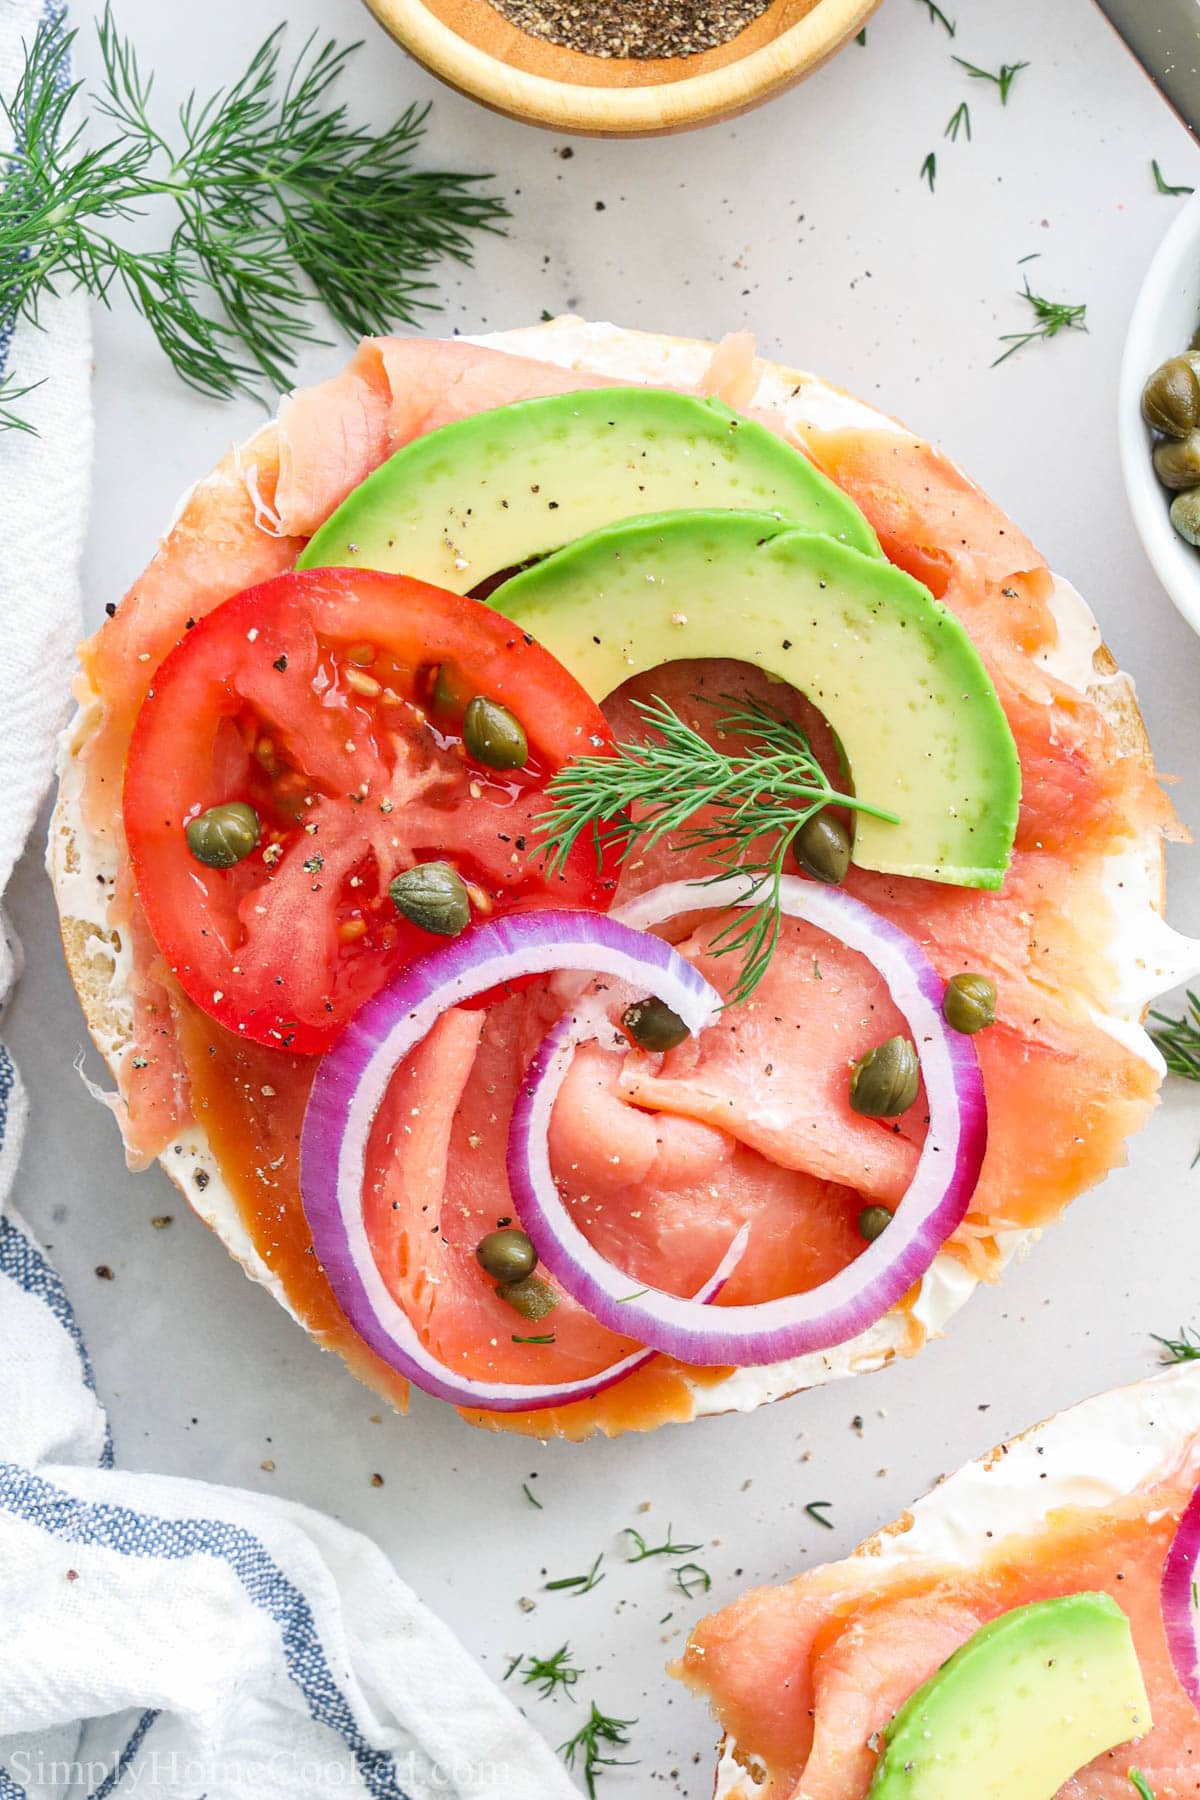 Smoked Salmon Bagel topped with onion, capers, tomato, dill, and avocado.